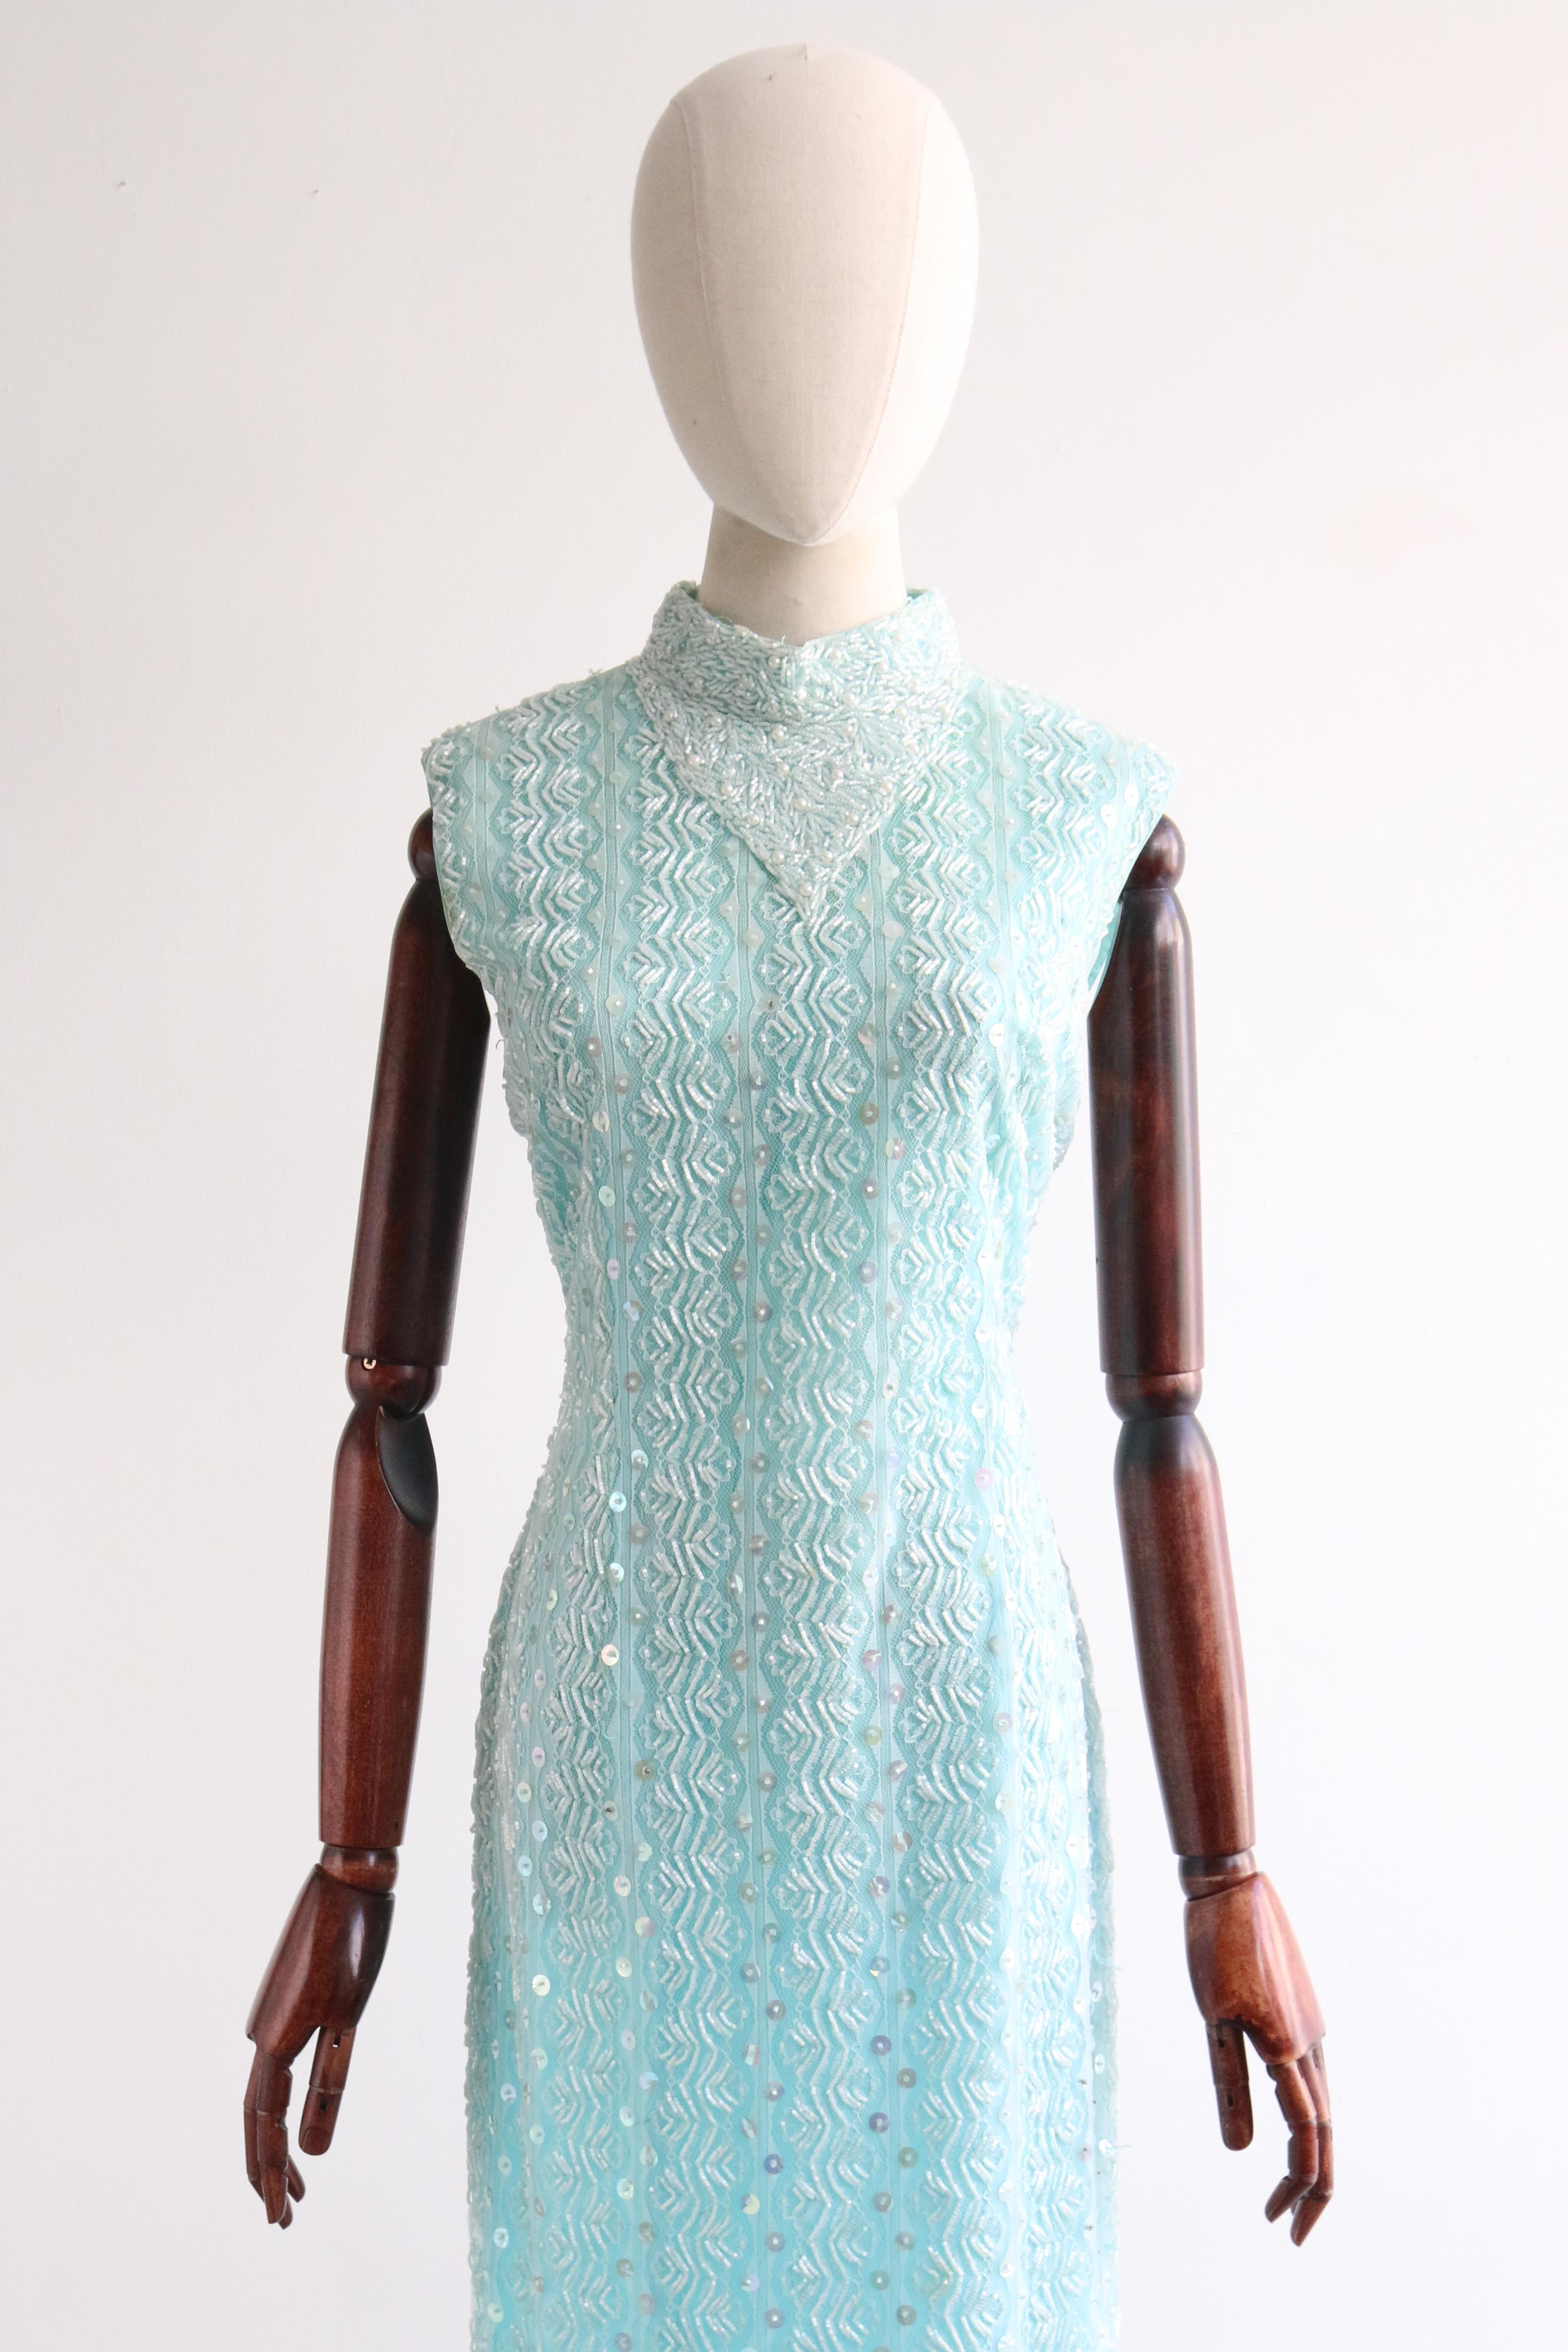 This mesmerising 1960's aqua coloured dress, embellished with a pale blue overlay of floral lace, which is in turn decorated with pearlescent glass beads, iridescent sequins and pearls, is the perfect statement piece for your cocktail wardrobe.